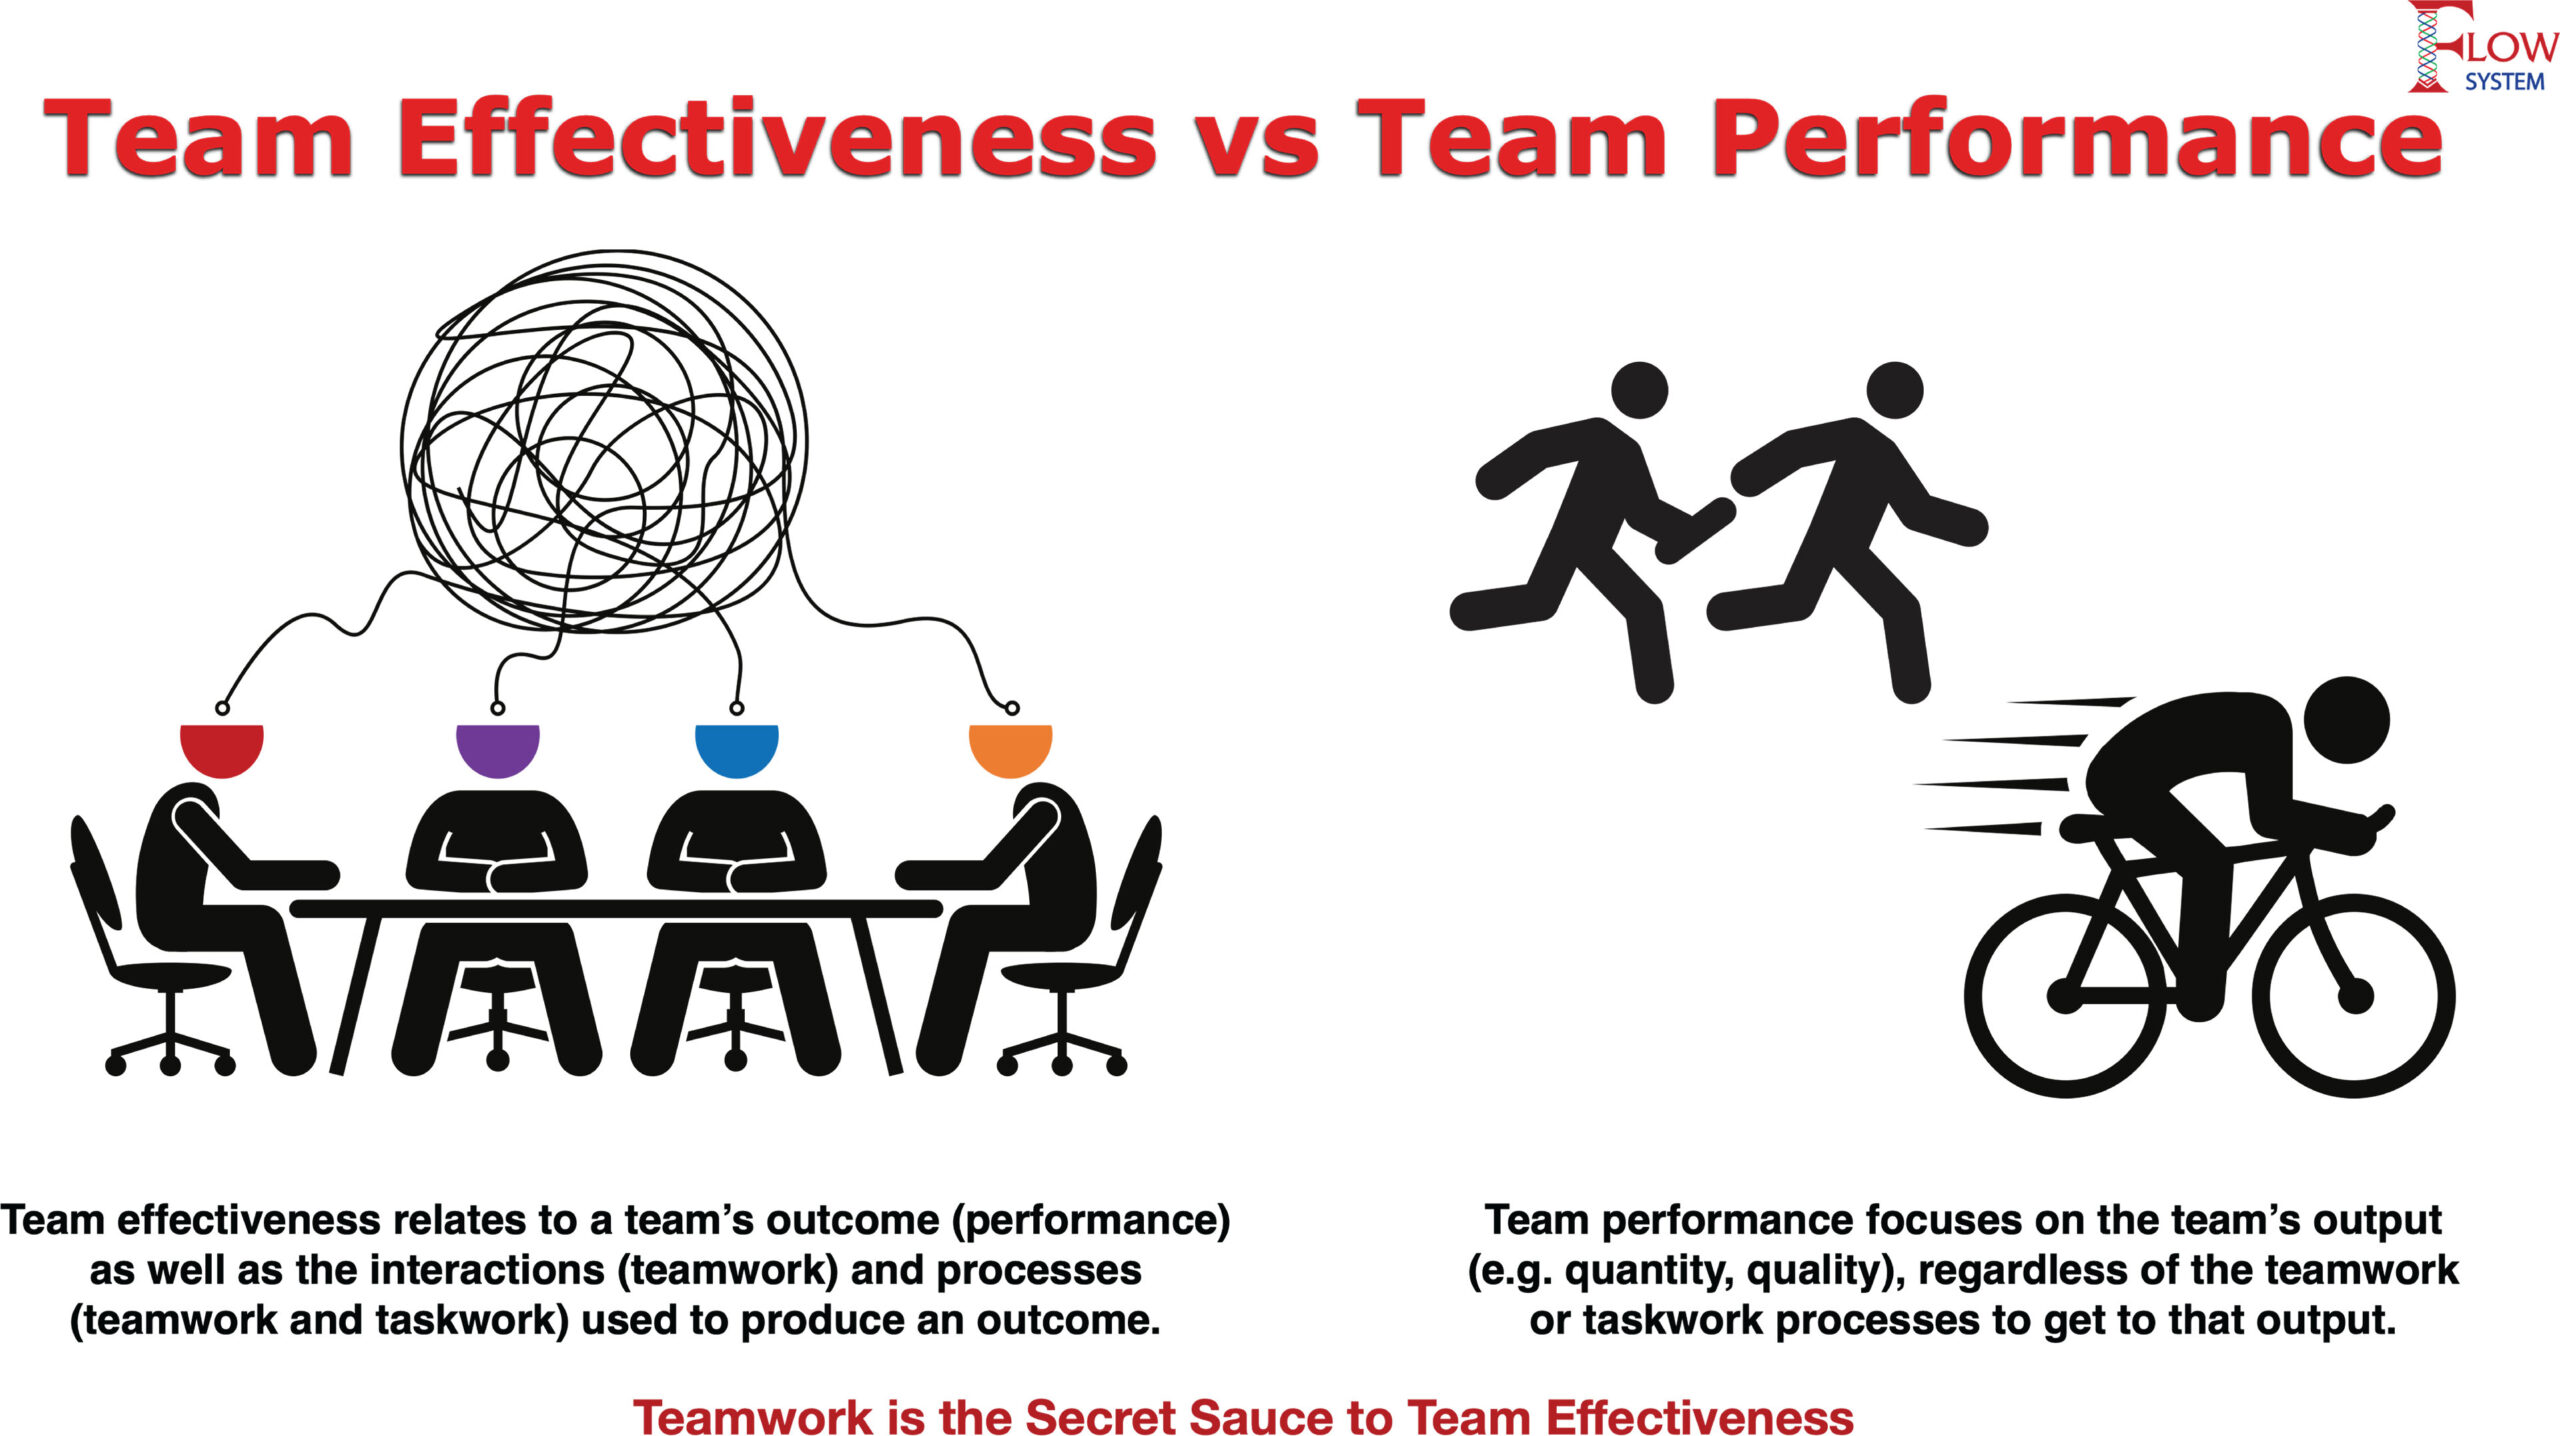 Contrast Team Effectiveness with Team Performance